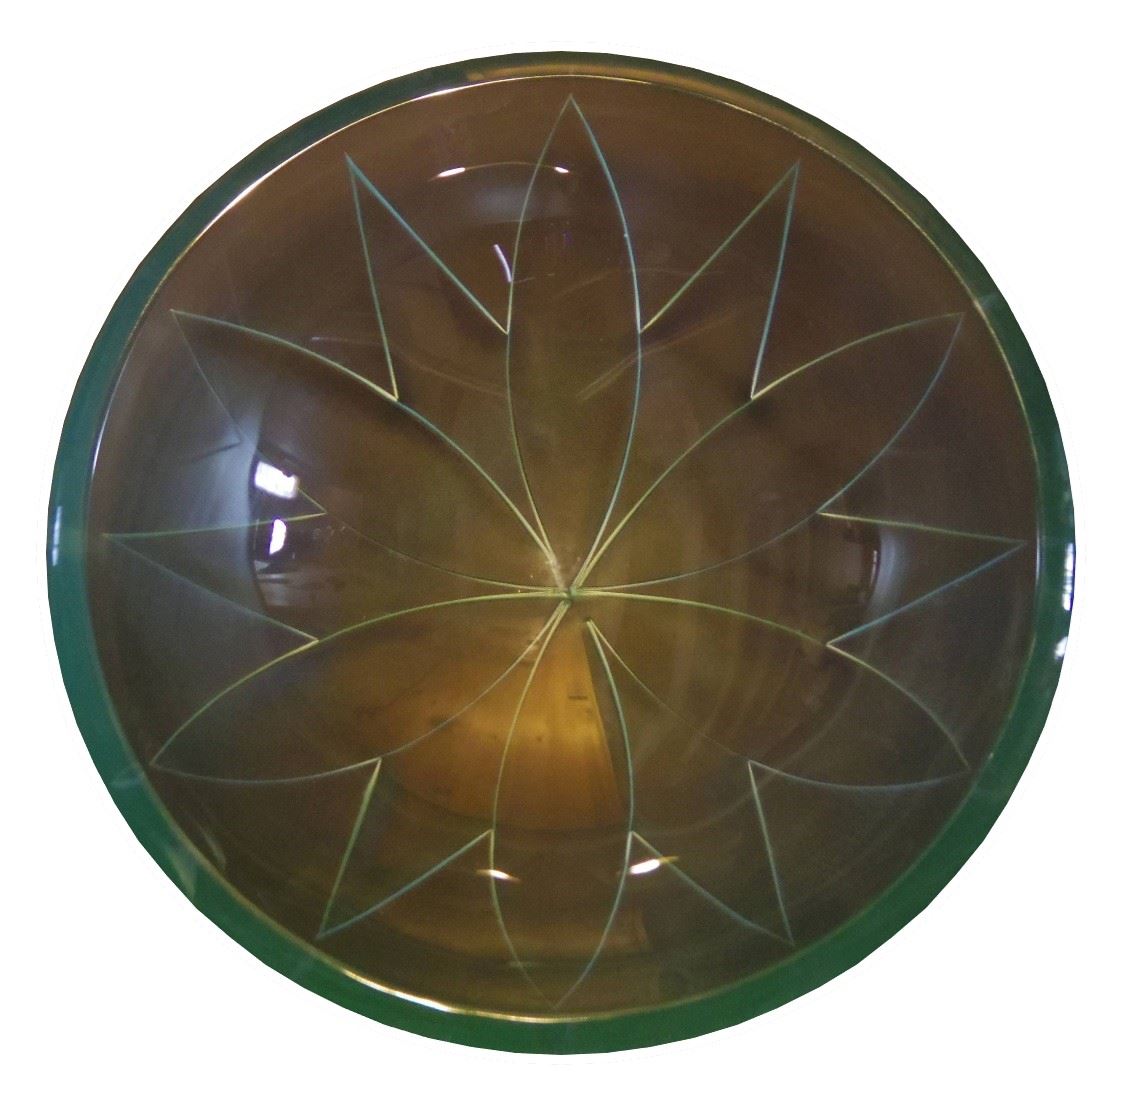 Picture of Pinwheel Glass Sink